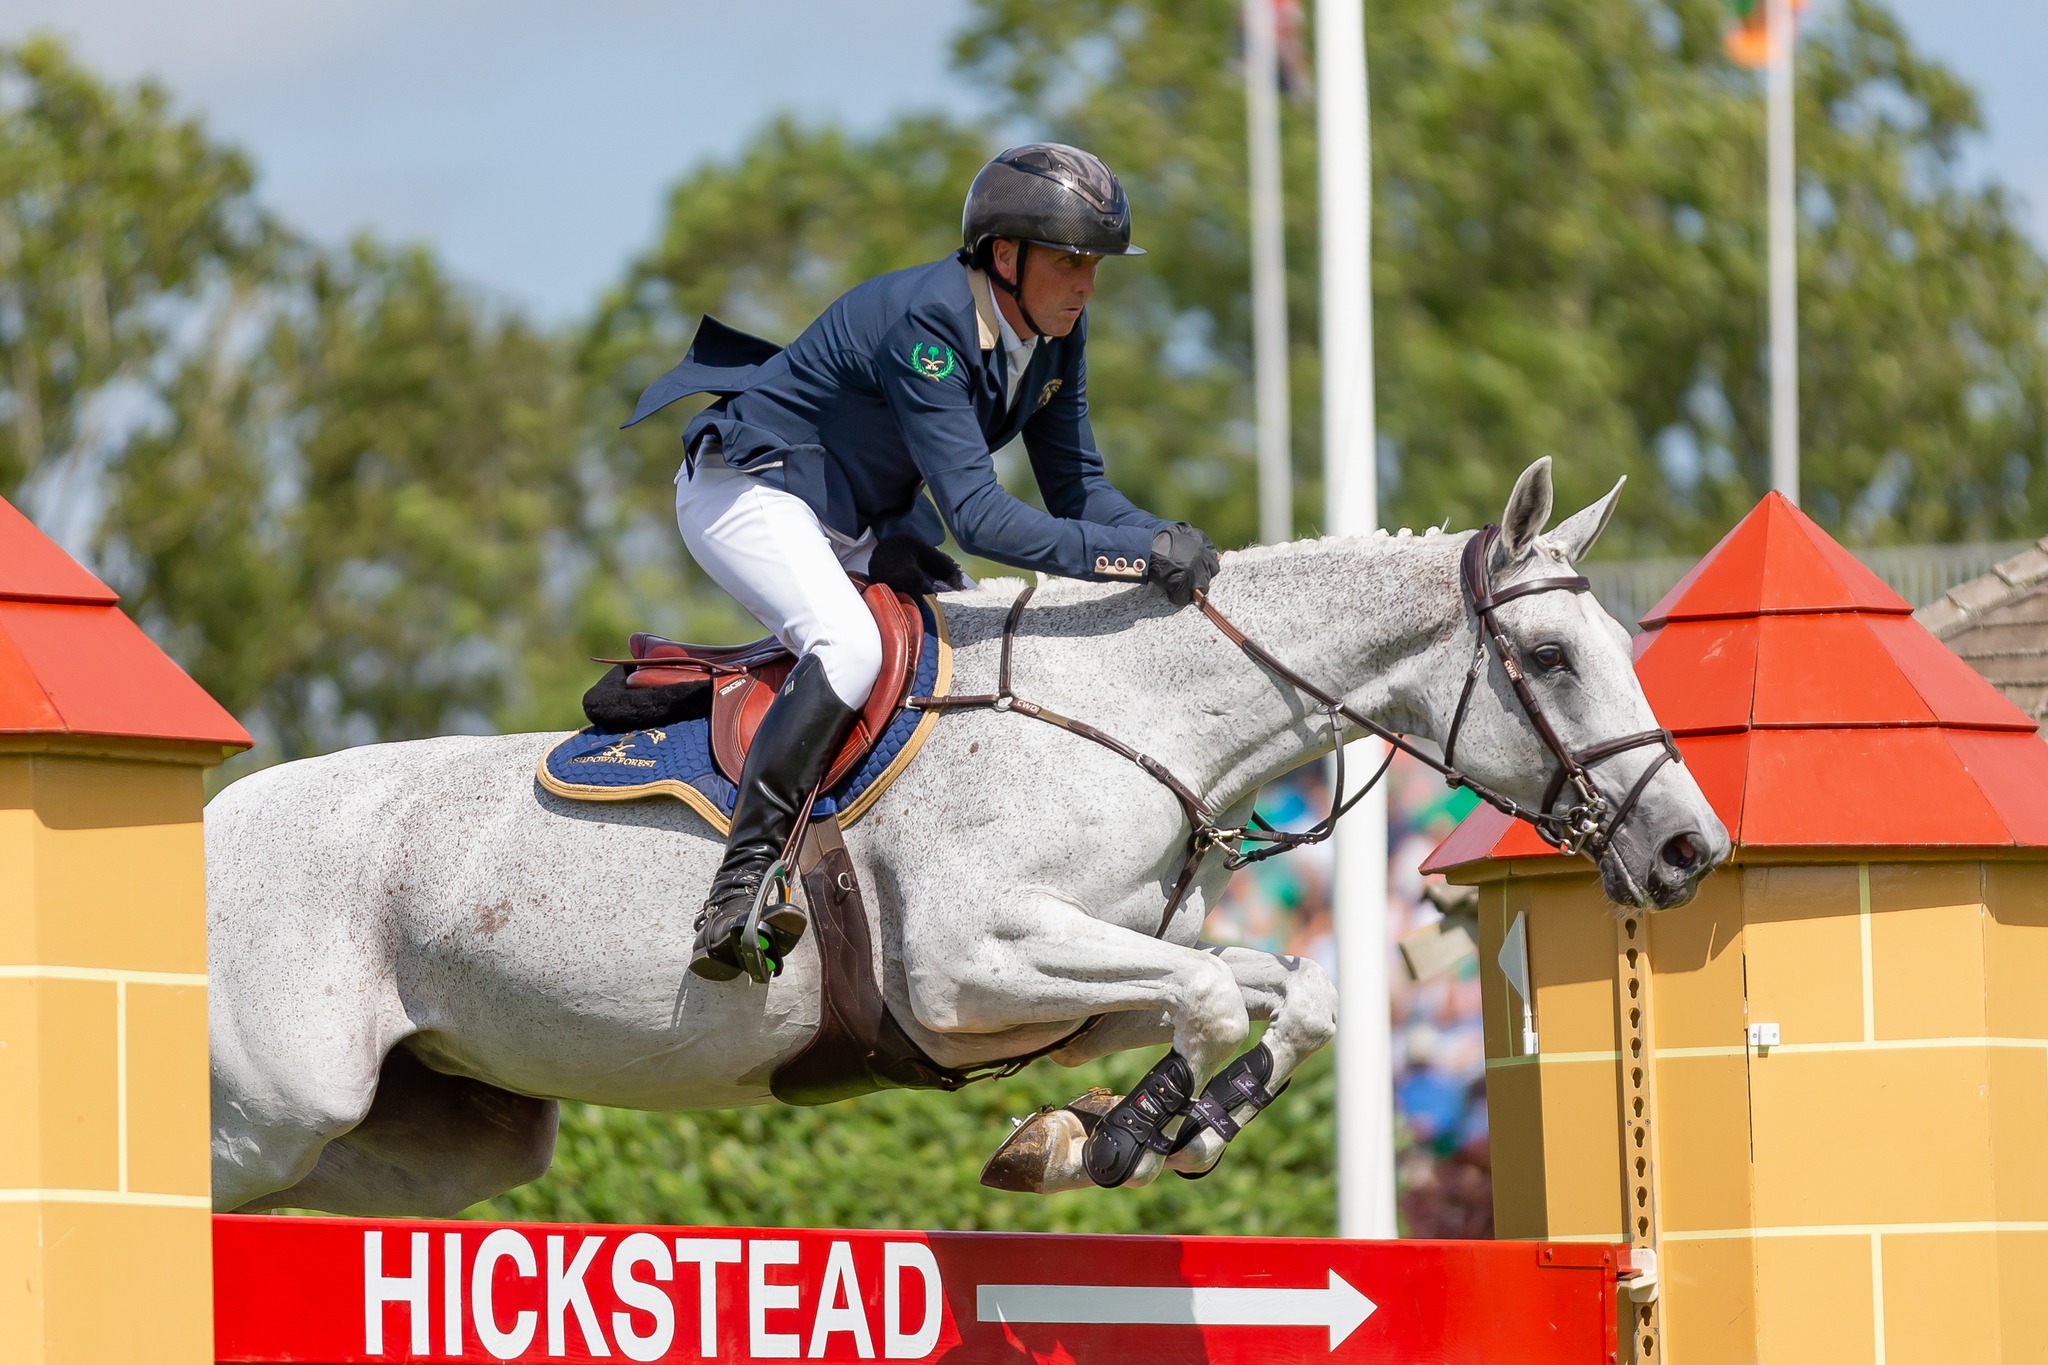 Shane Breen wins own sponsored class in Hickstead: "Maybe next time I should sponsor the King's Cup"